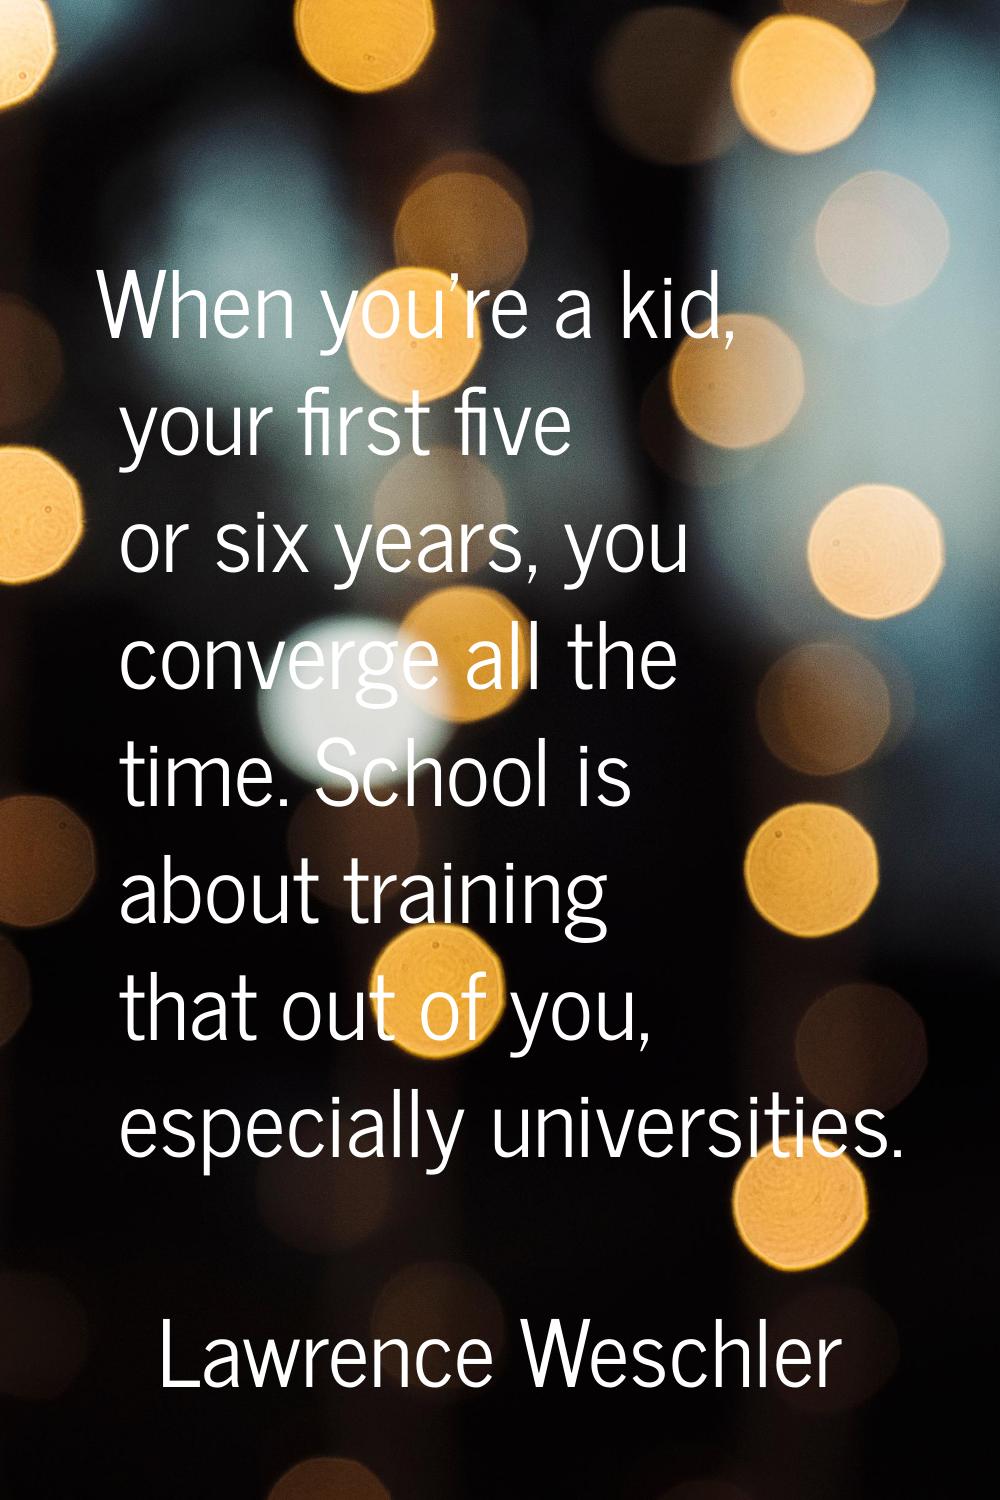 When you're a kid, your first five or six years, you converge all the time. School is about trainin